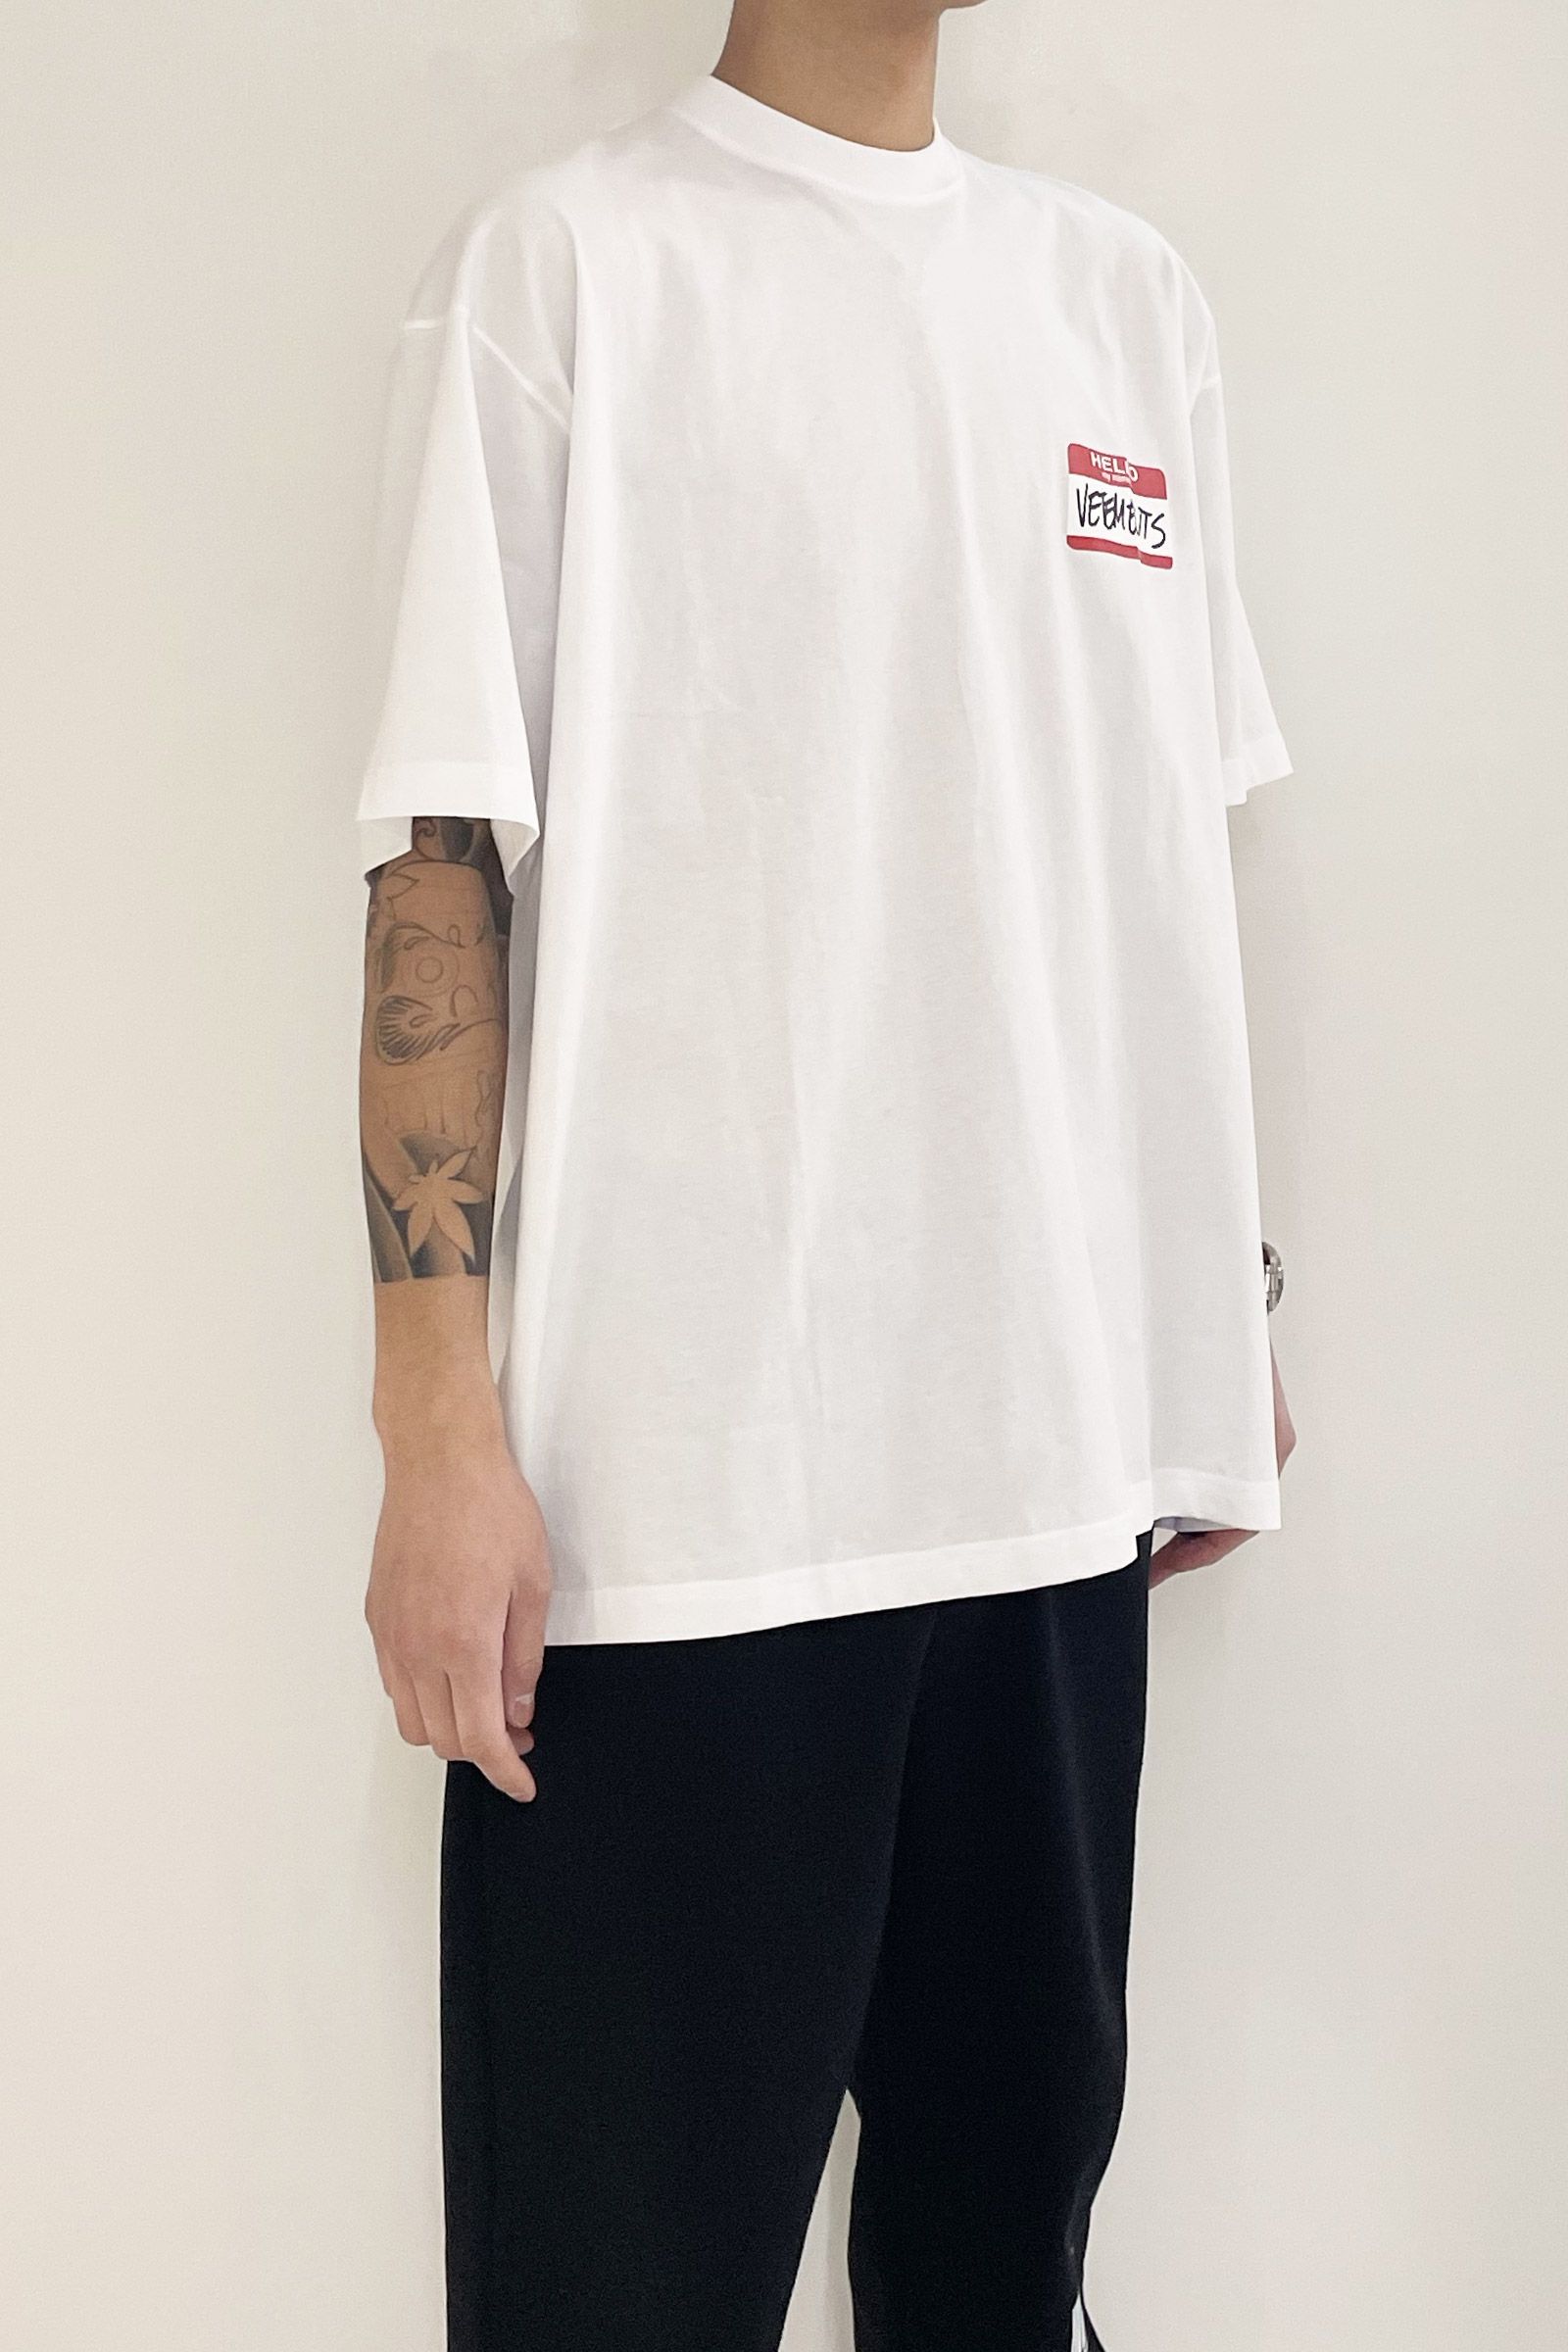 MY NAME IS VETEMENTS T-SHIRT/WHITE - XS